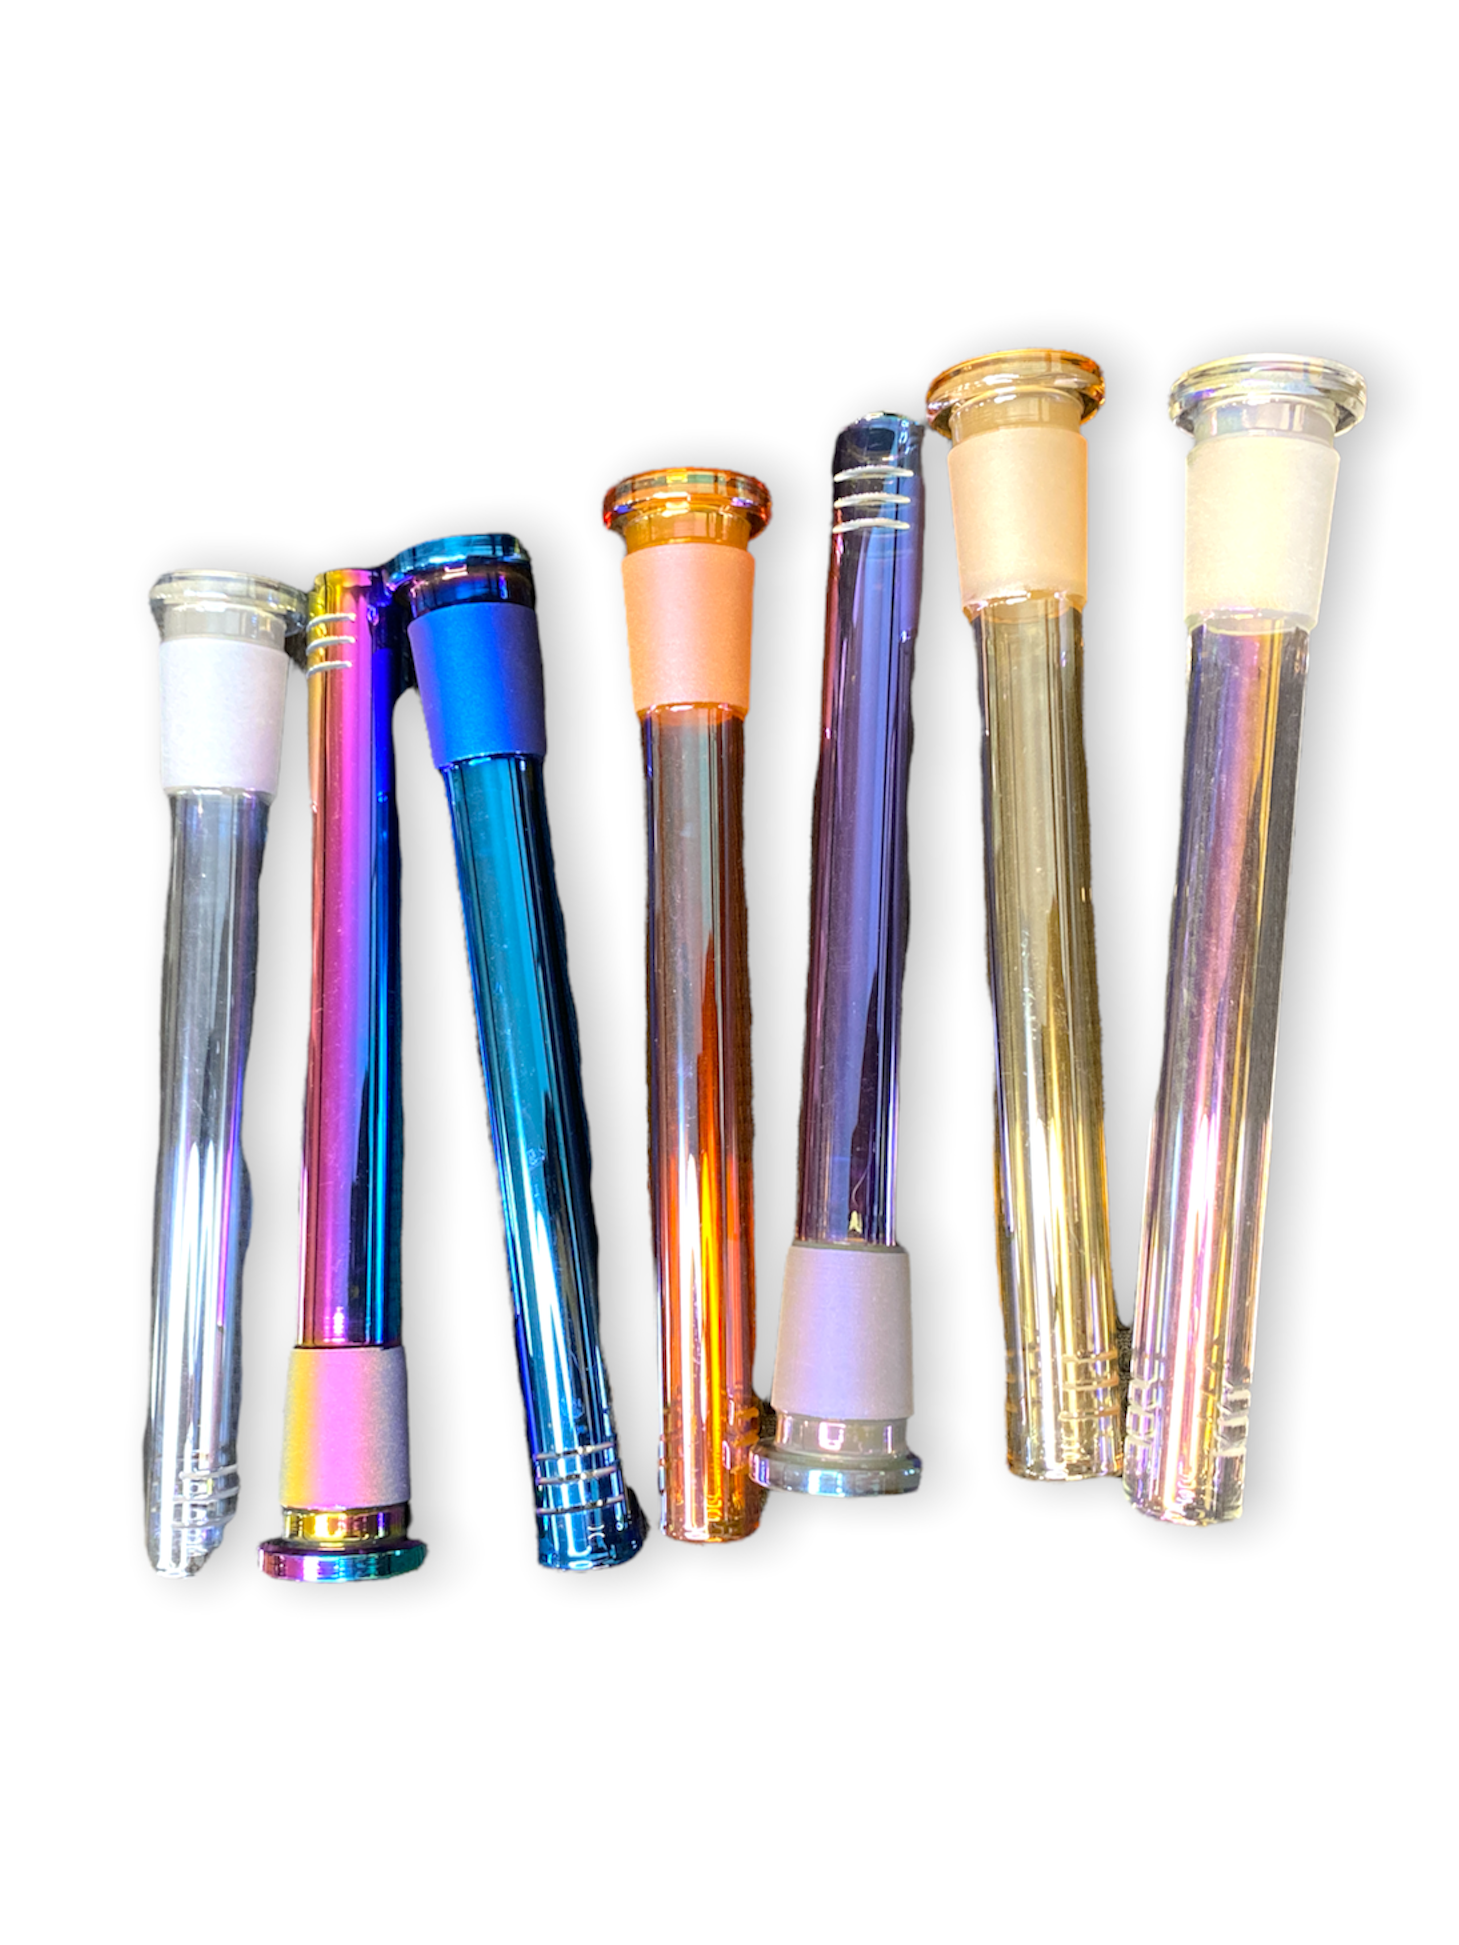 6" - Metallic Shiny Down Stems - (ASSORTED Colors)